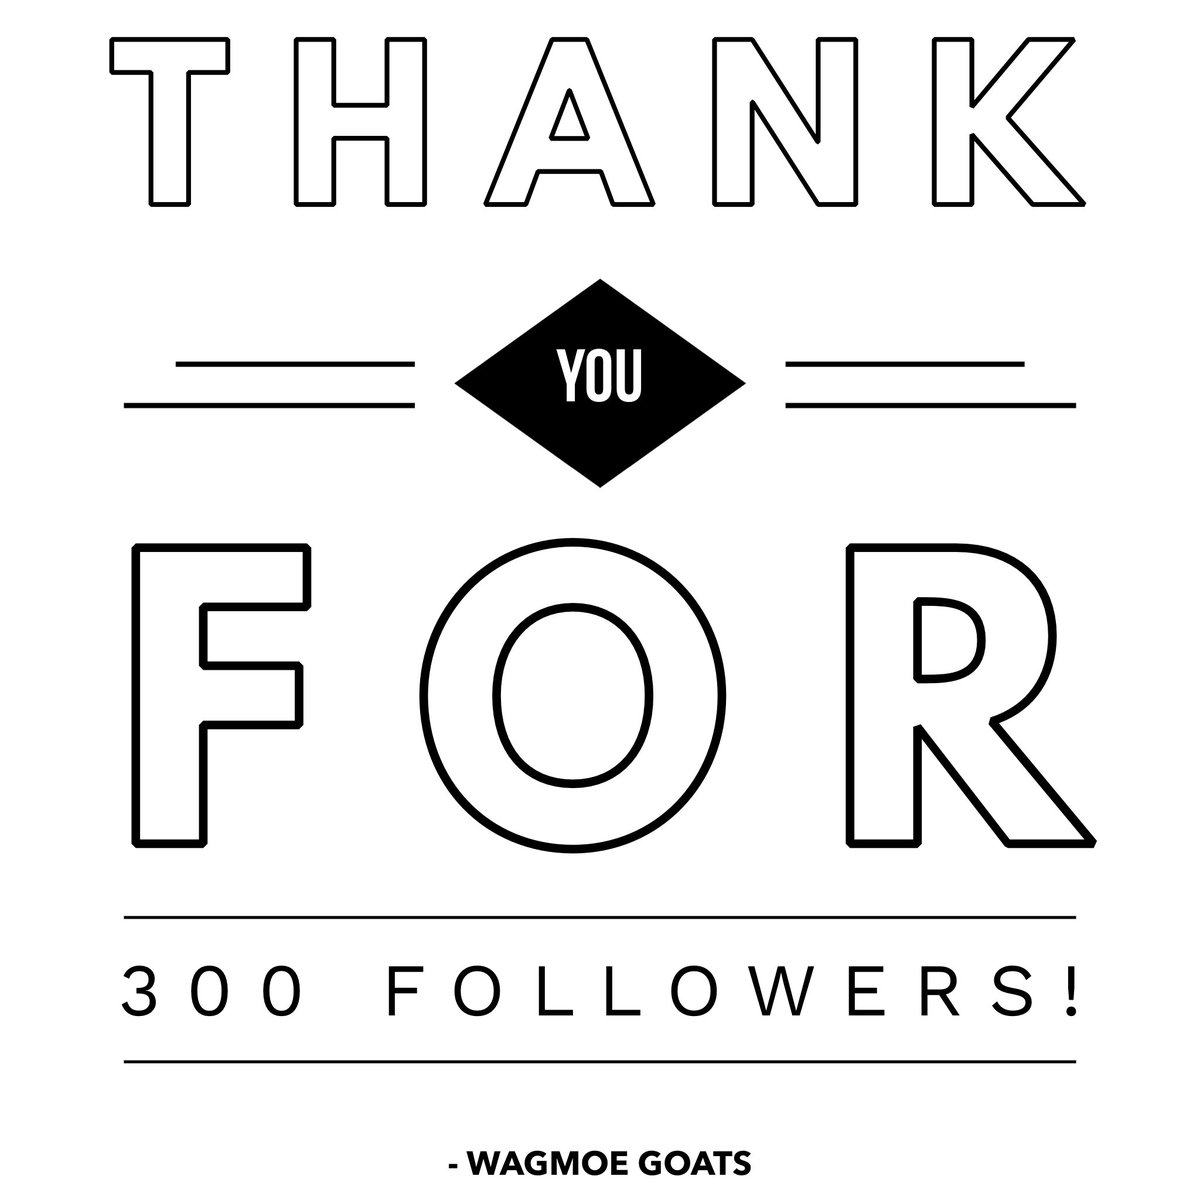 Thank you for 300 FOLLOWERS 🎉

We will continue building new connections and assisting with achieving great reach & exposure for the WAGMOE community members.

Thank you to our members for supporting us, we look forward to onboarding and meeting new people ❤️

LFGROW 🐐